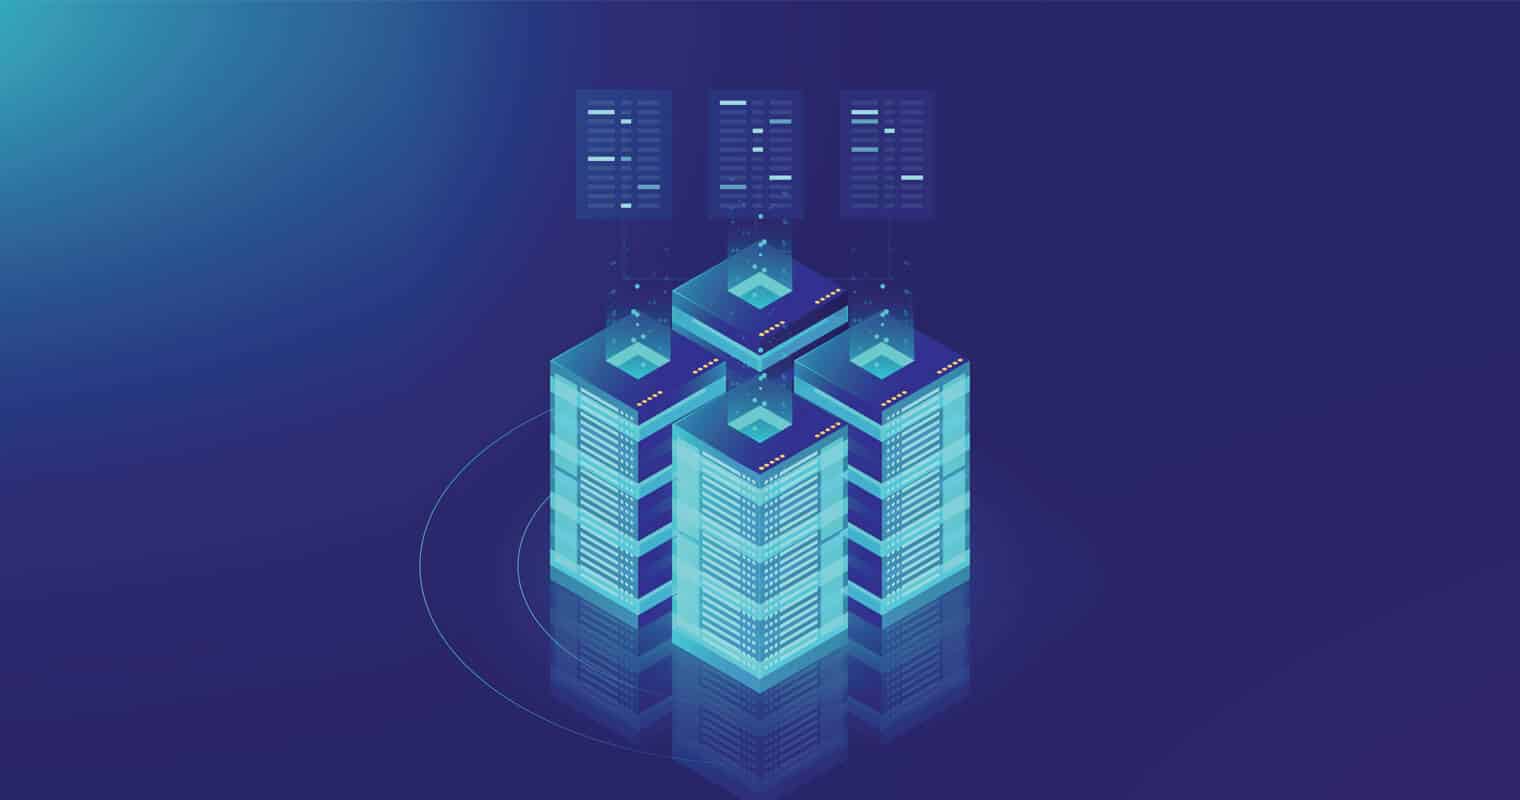 An isometric graphic of a stylized, glowing blue data warehouse structure with server racks on a dark background.